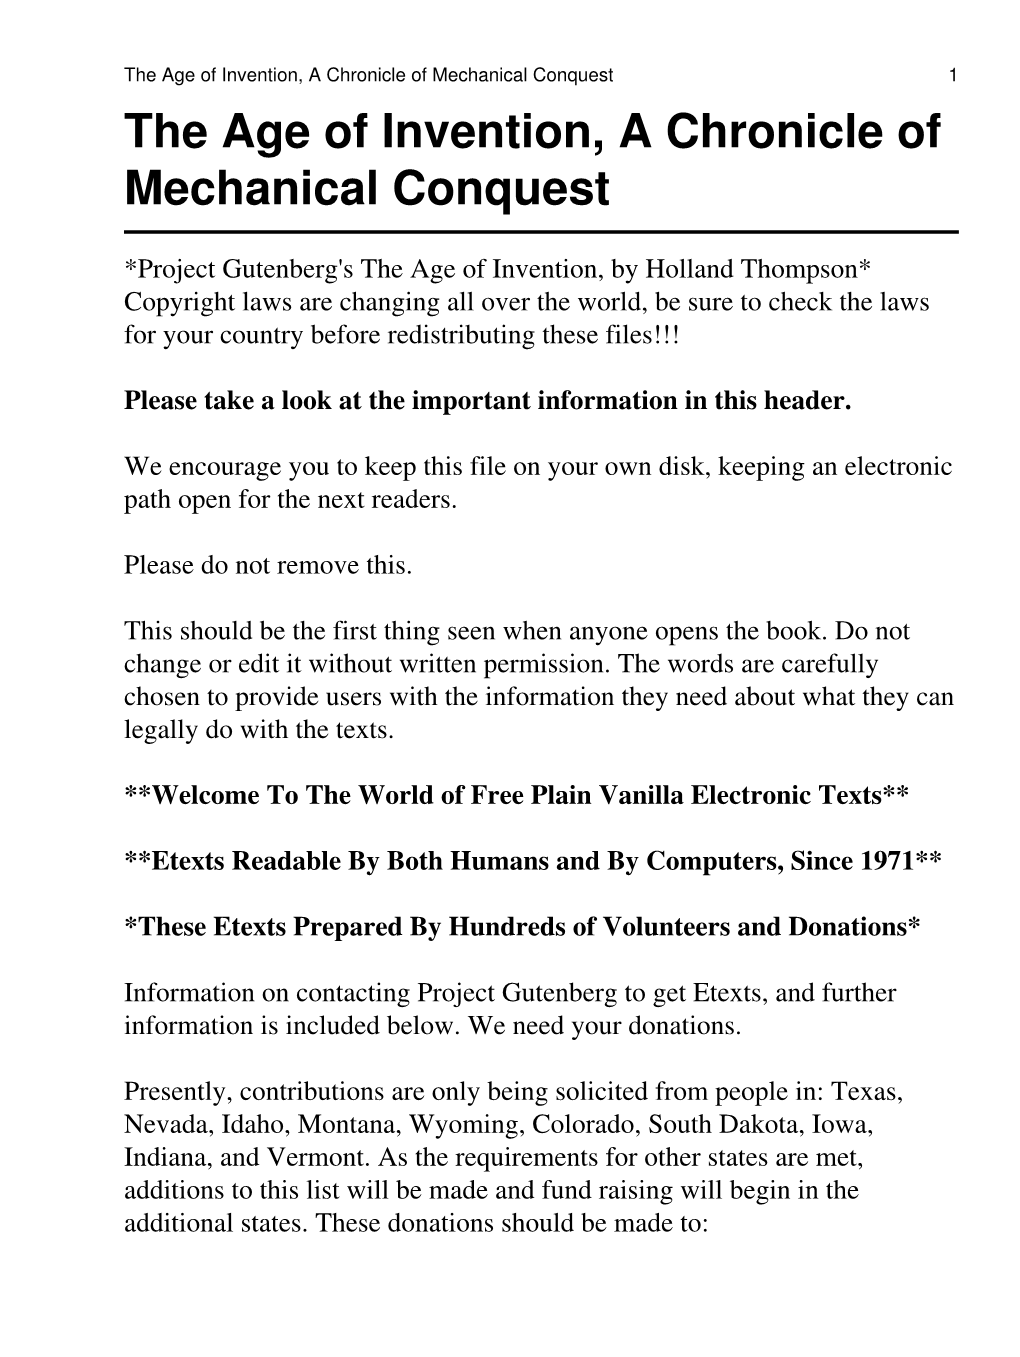 The Age of Invention, a Chronicle of Mechanical Conquest 1 the Age of Invention, a Chronicle of Mechanical Conquest